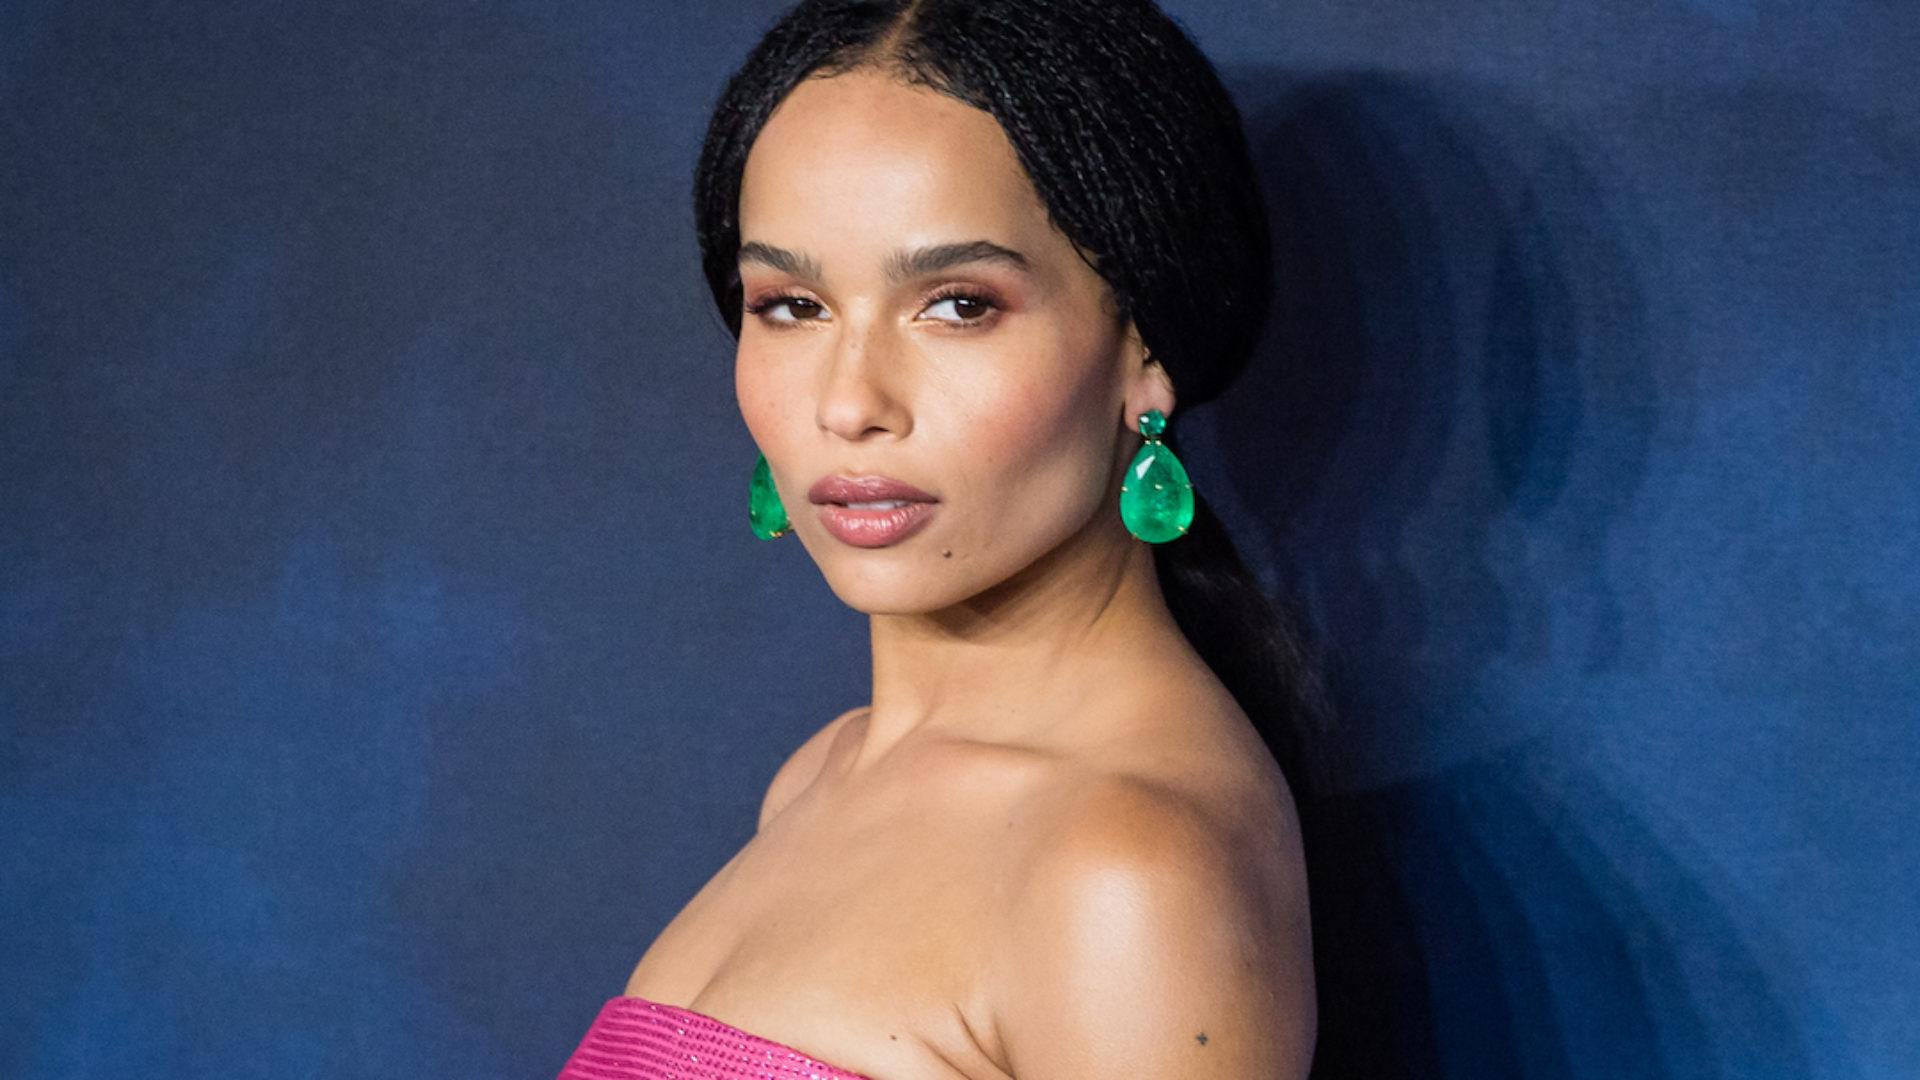 Zoe Kravitz Is The New Catwoman In 'The Batman'